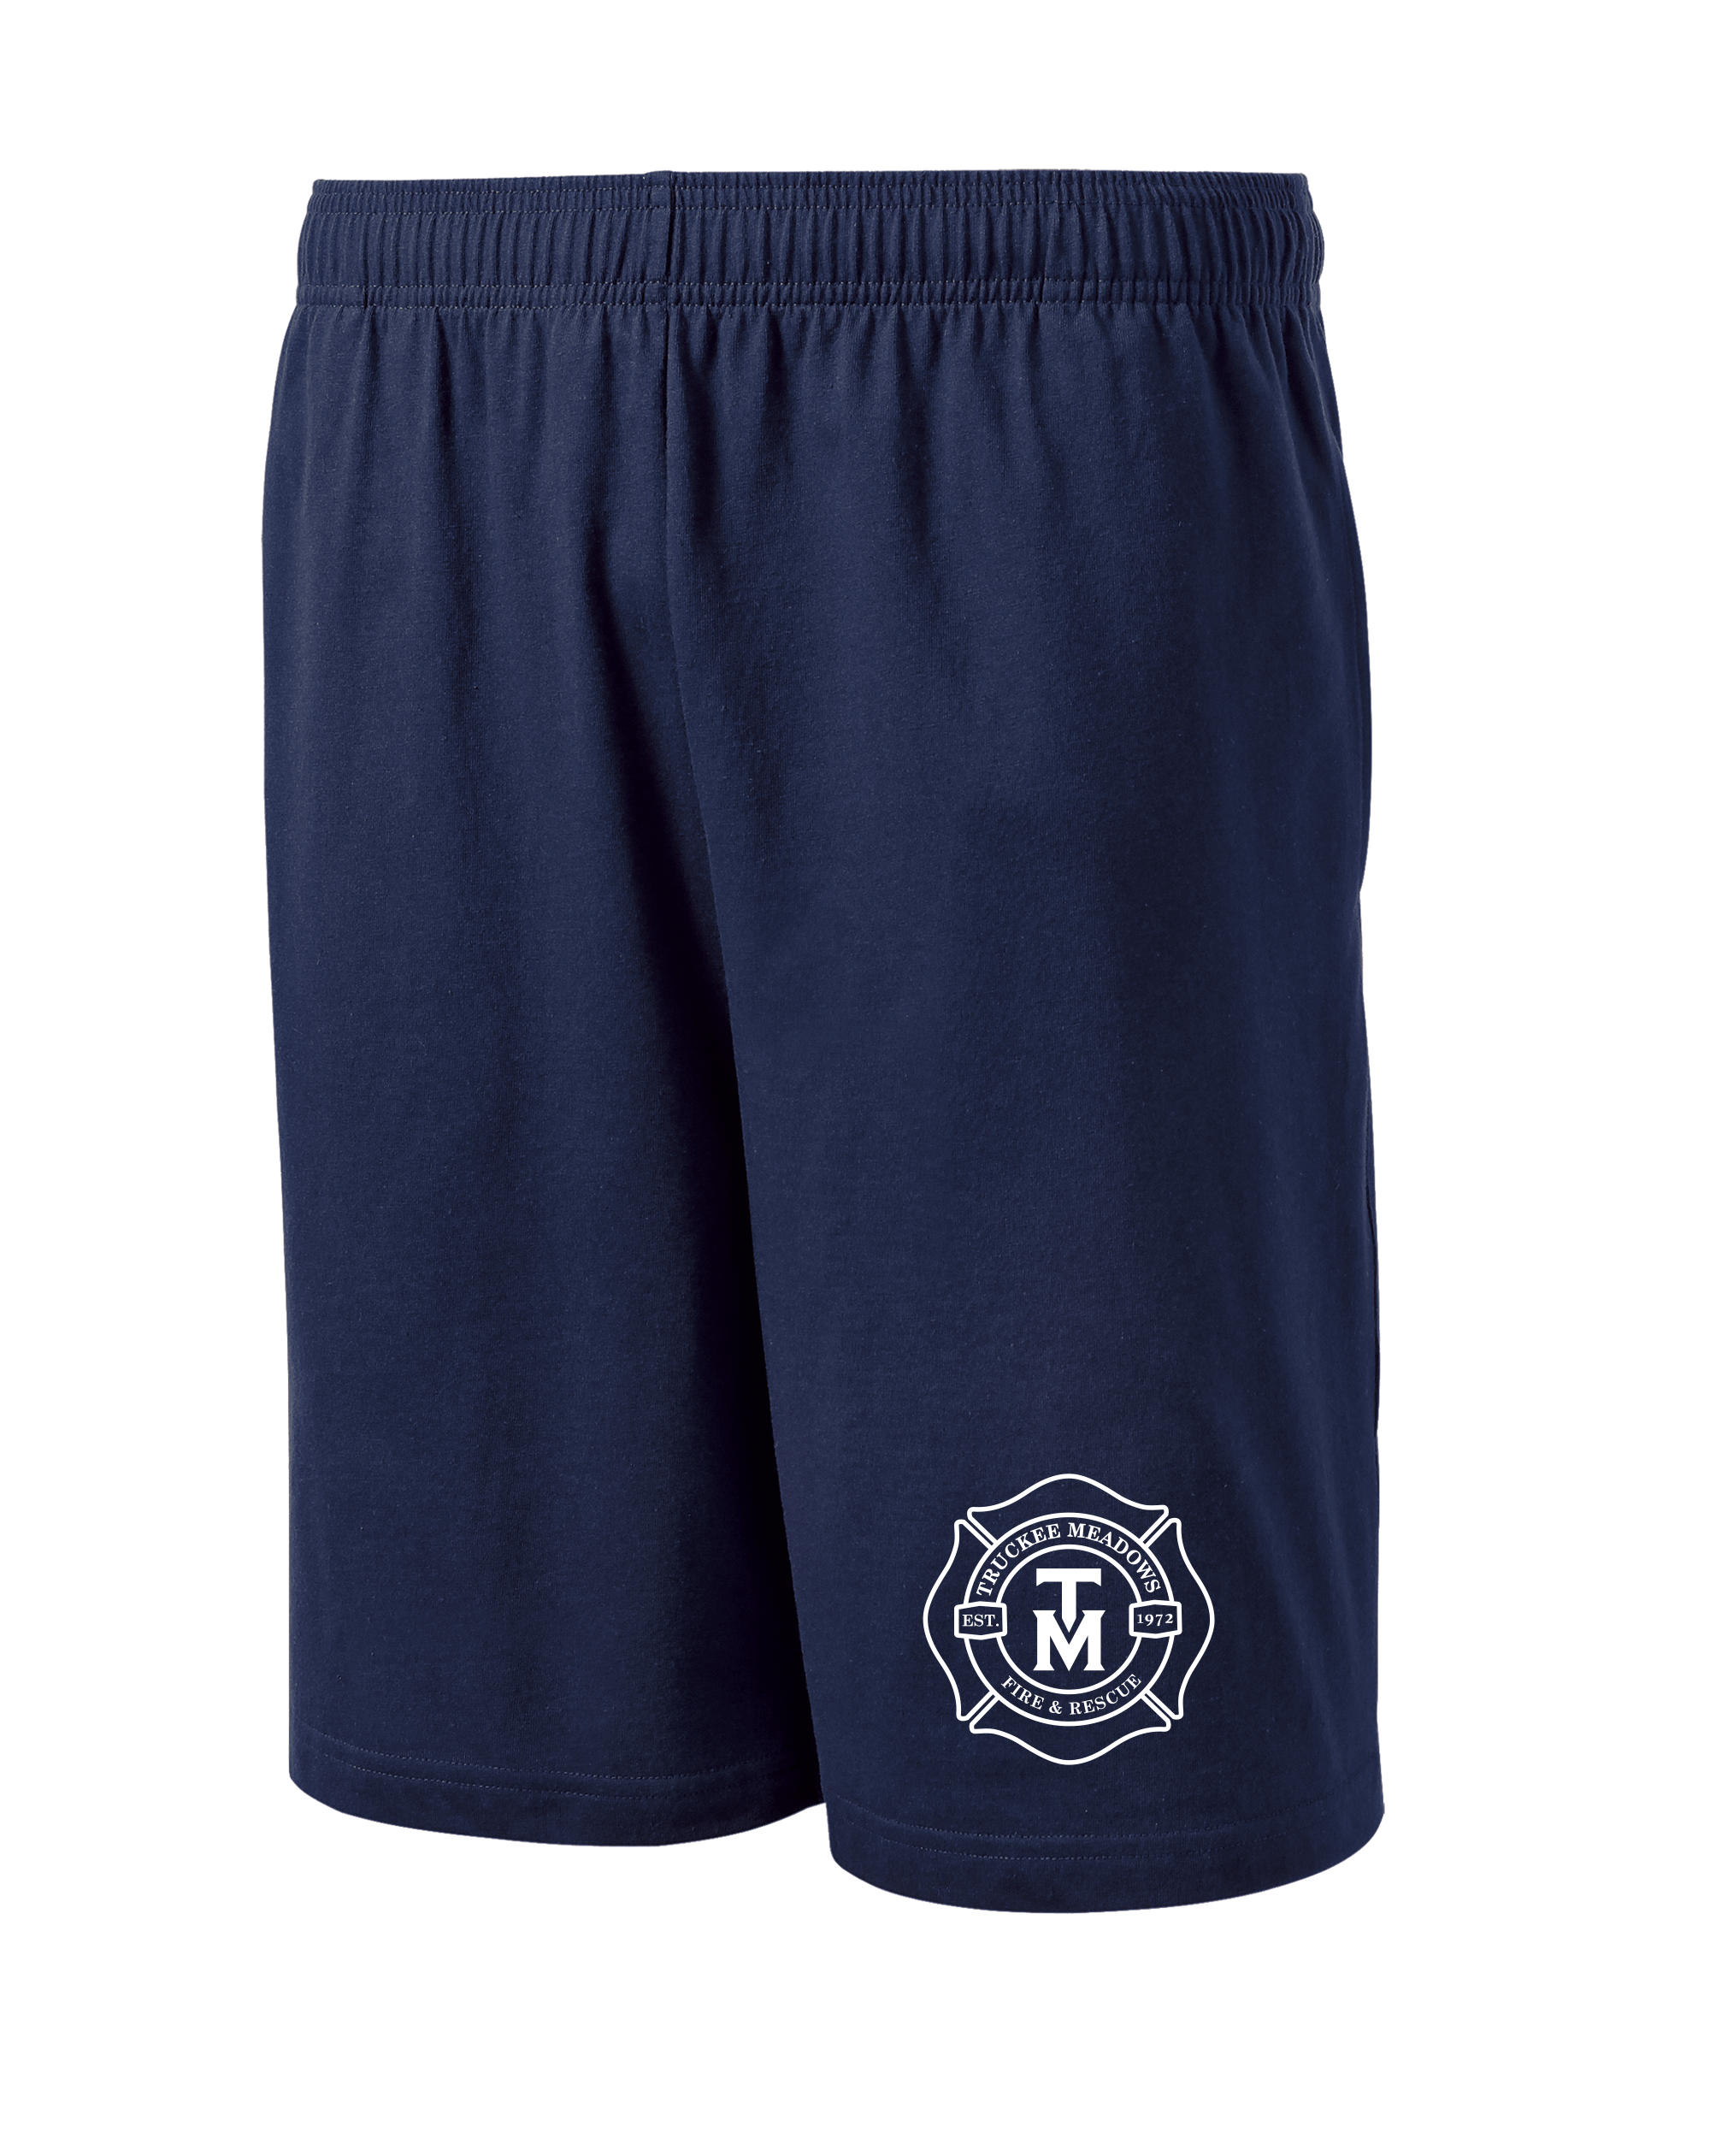 Truckee Meadows POCKETED Duty Workout Shorts